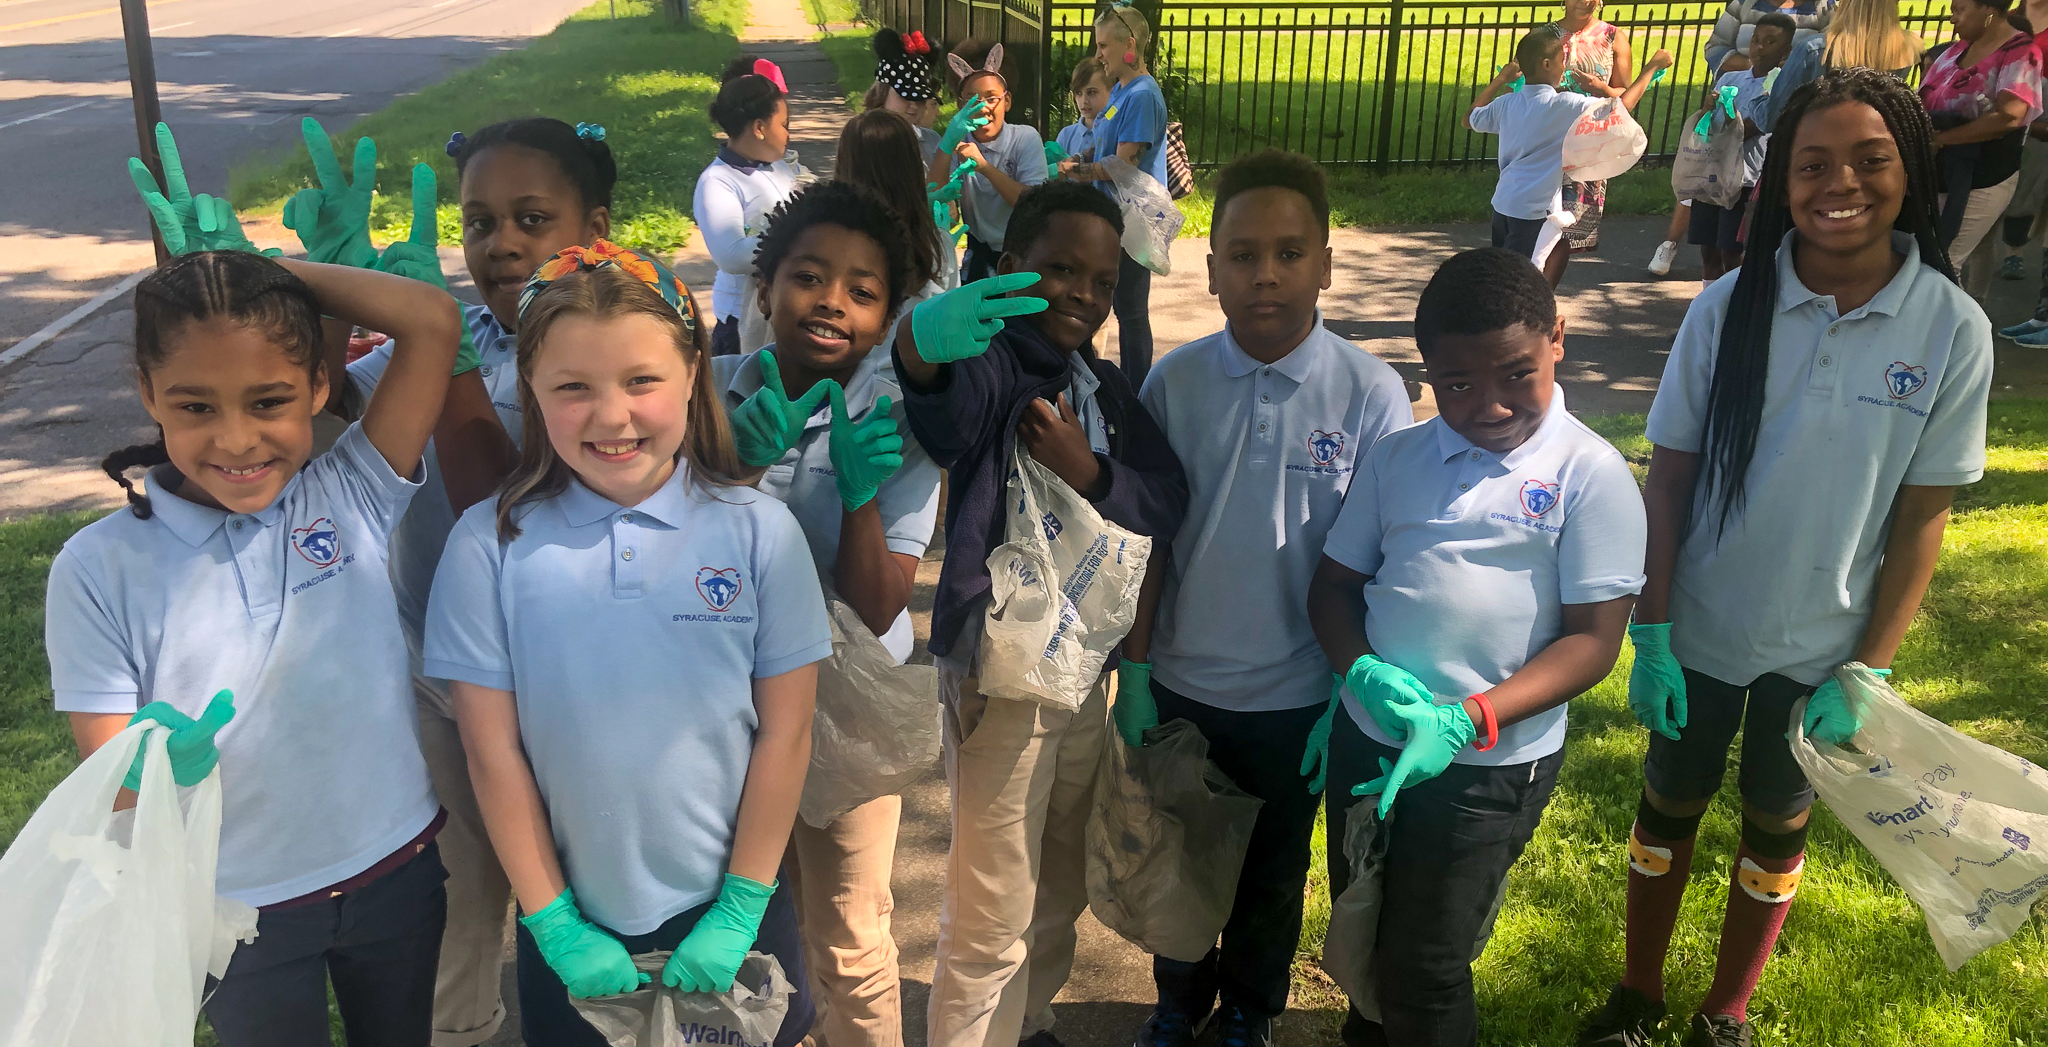 Atoms make a positive impact on our community by volunteering to pick up litter while en route to their field trip to Webster Duck Pond